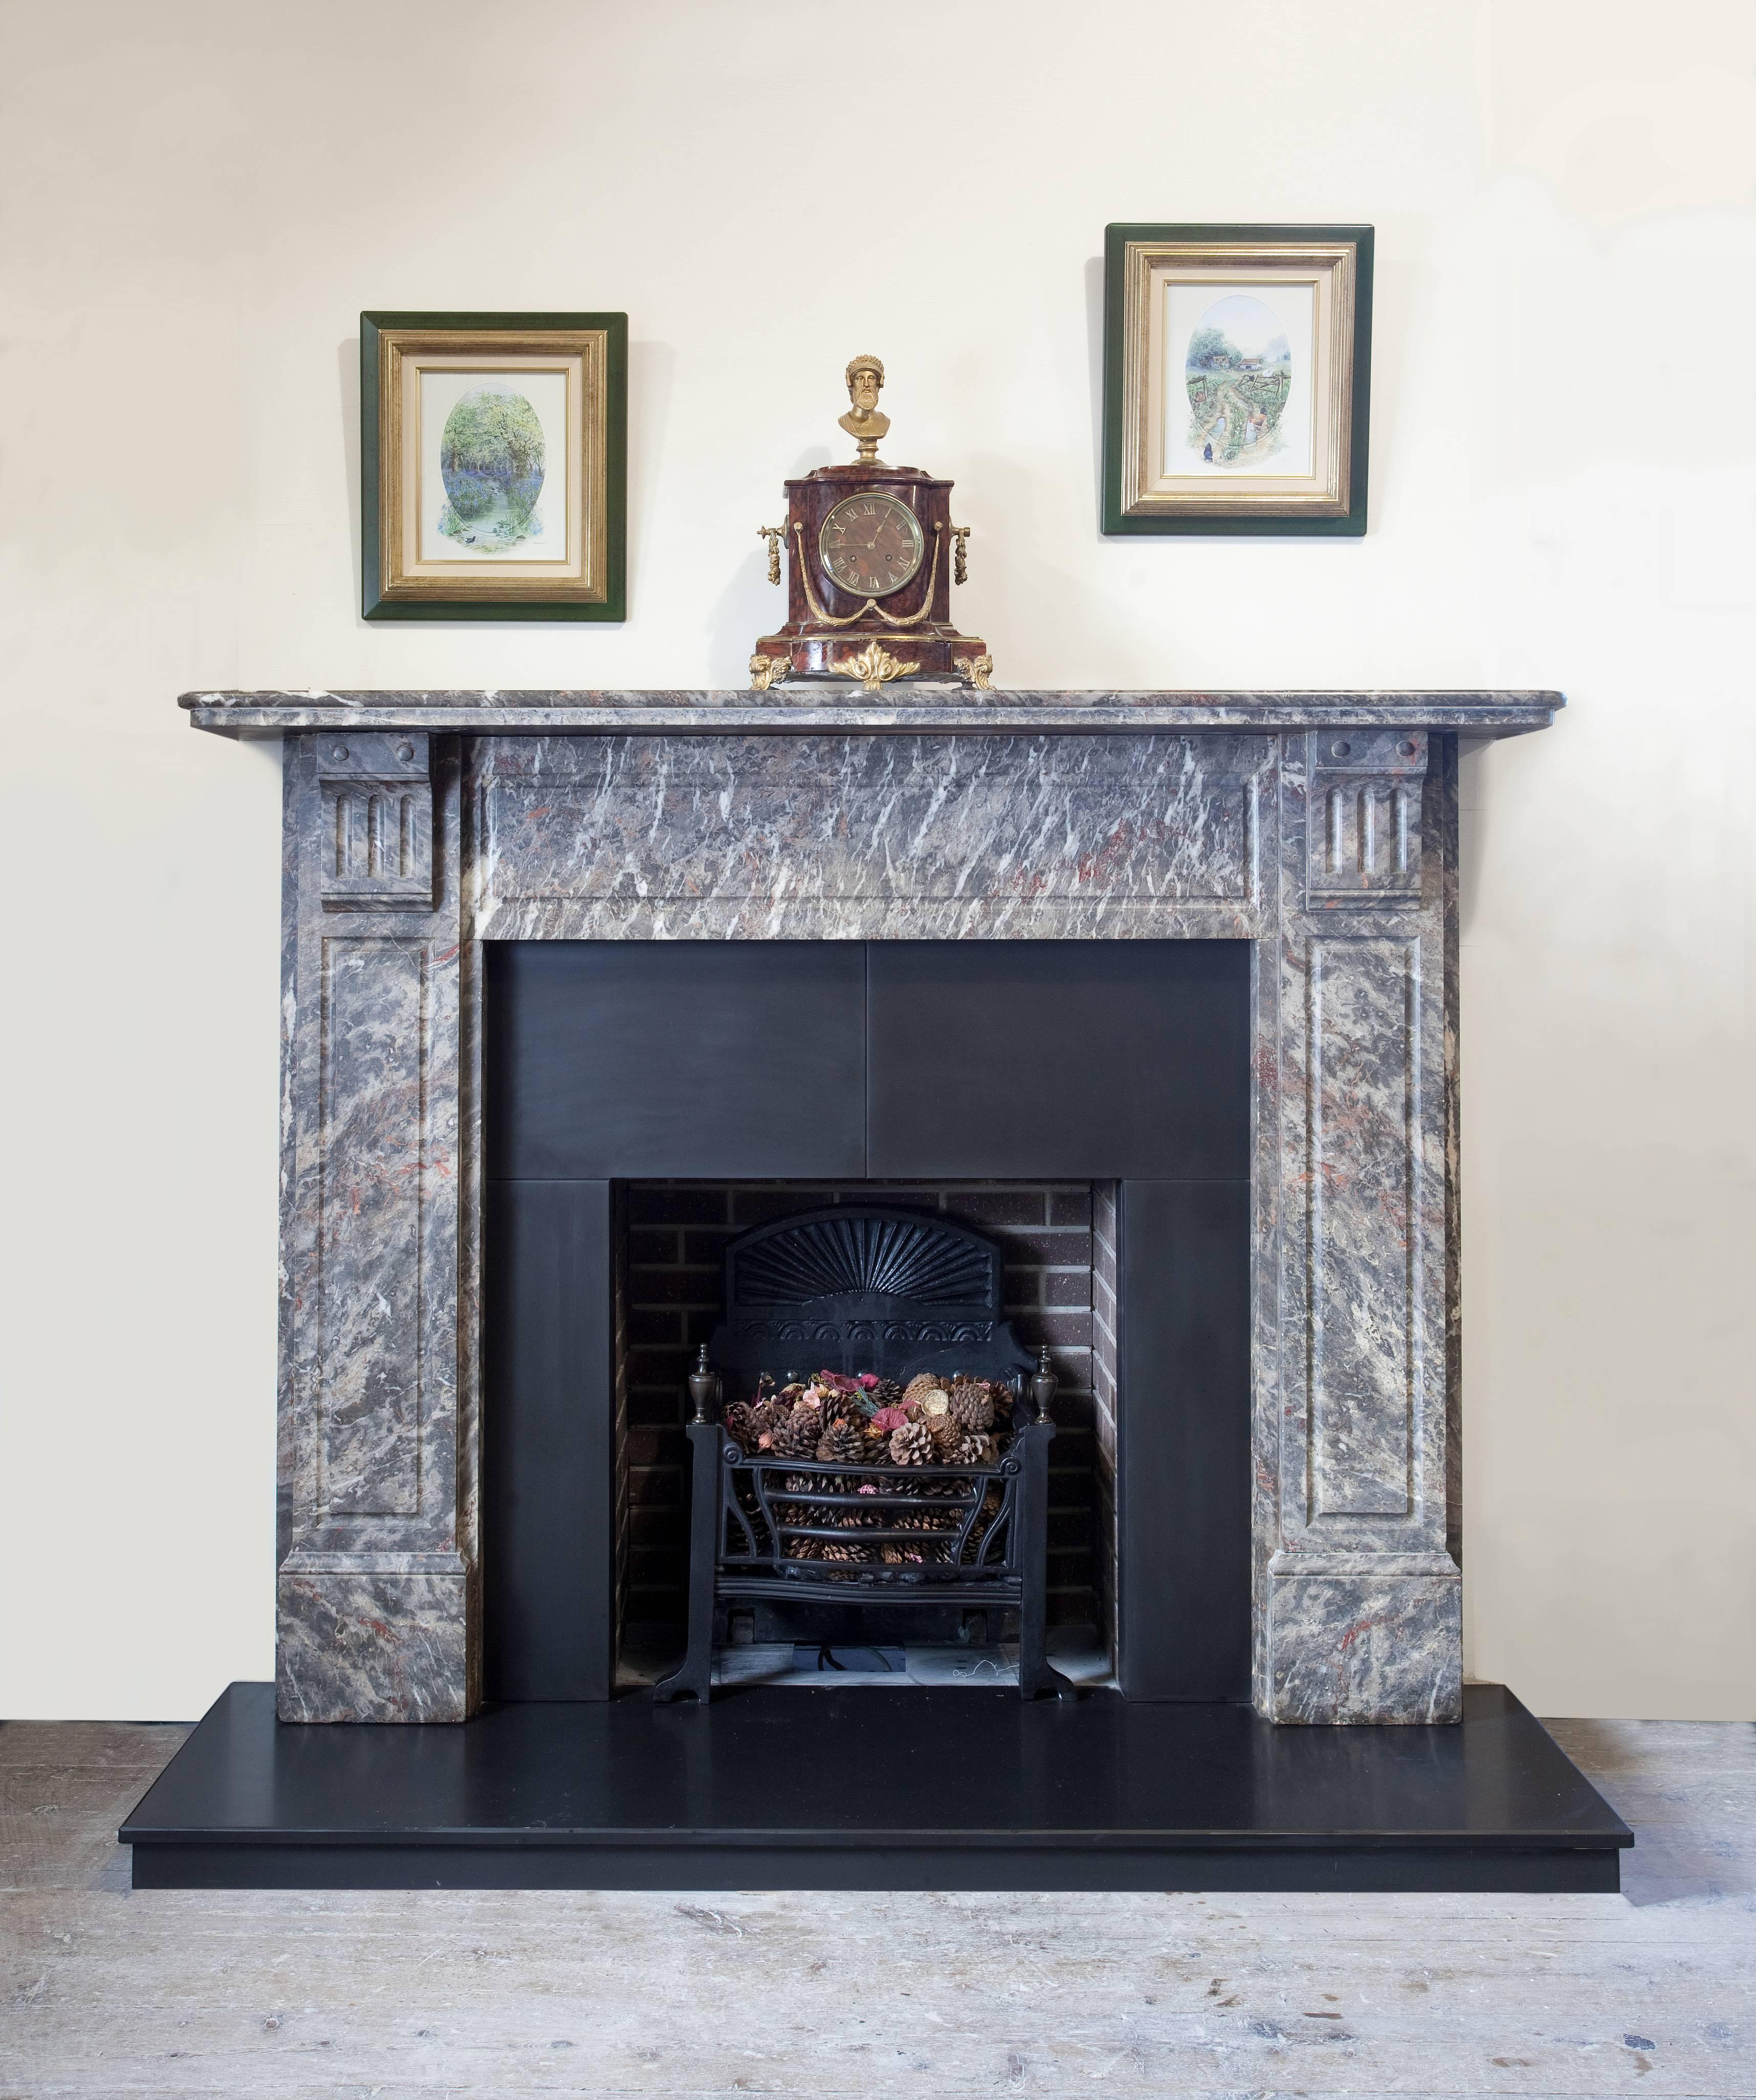 Antique Victorian hand-carved Breccia Pernice marble fireplace surround. Features fluted jambs and frieze, fluted corbels support two-tier mantel.

Approximate measurements:
Mantel width 66.75